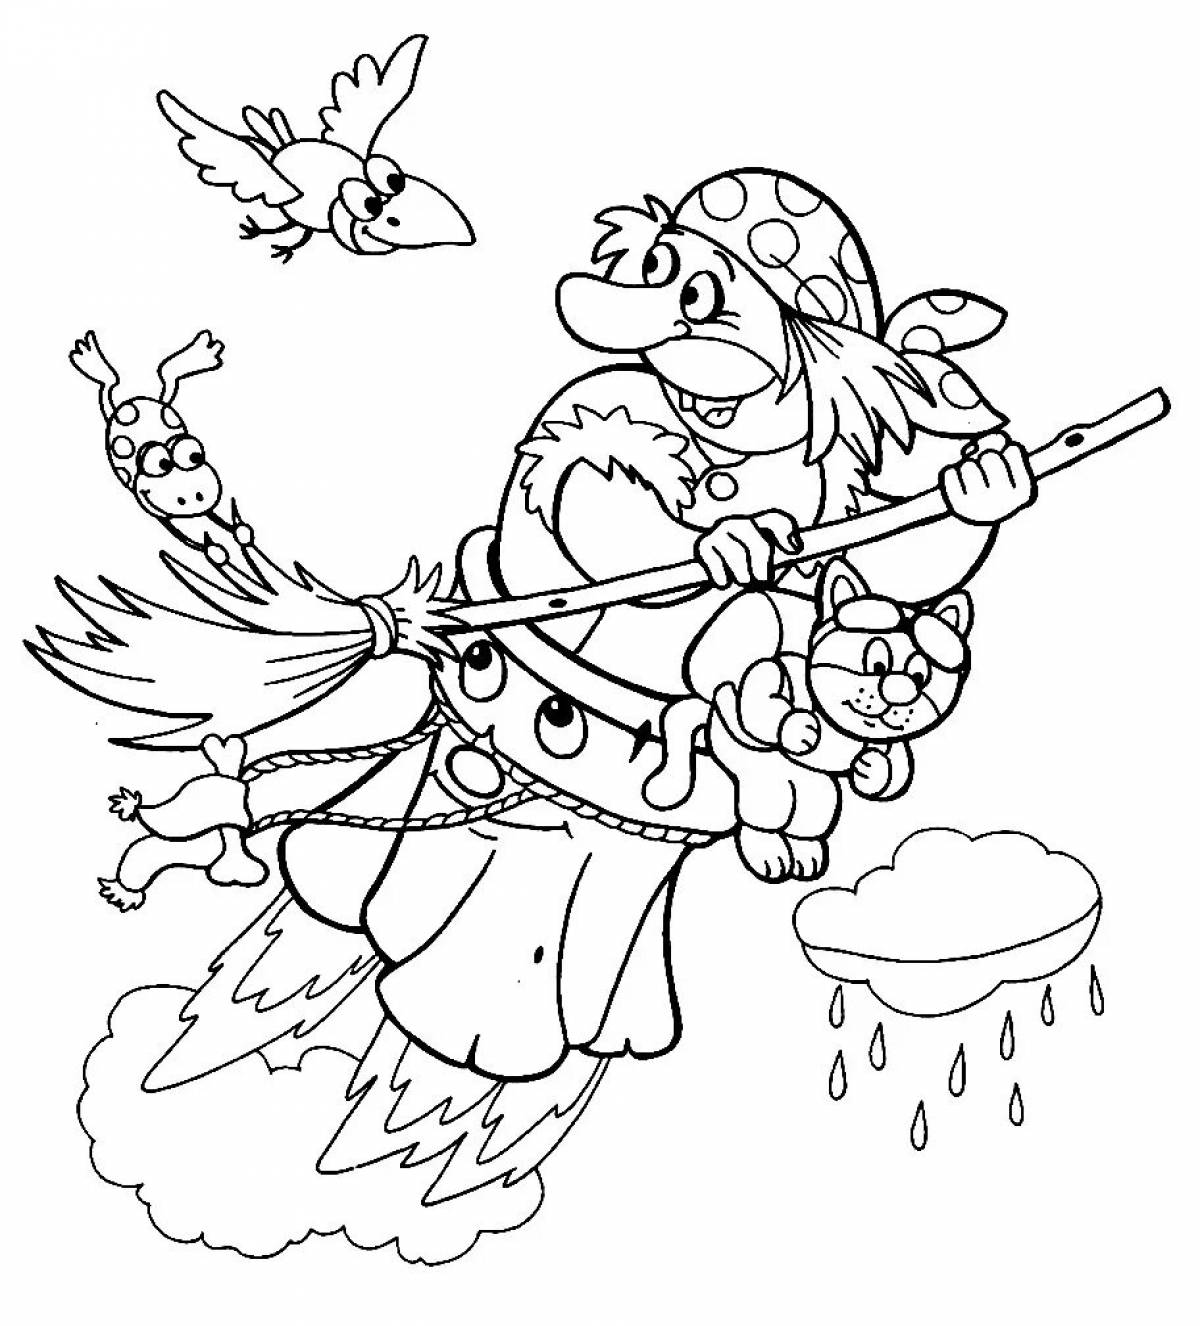 Amazing baba yaga coloring page for pre-k